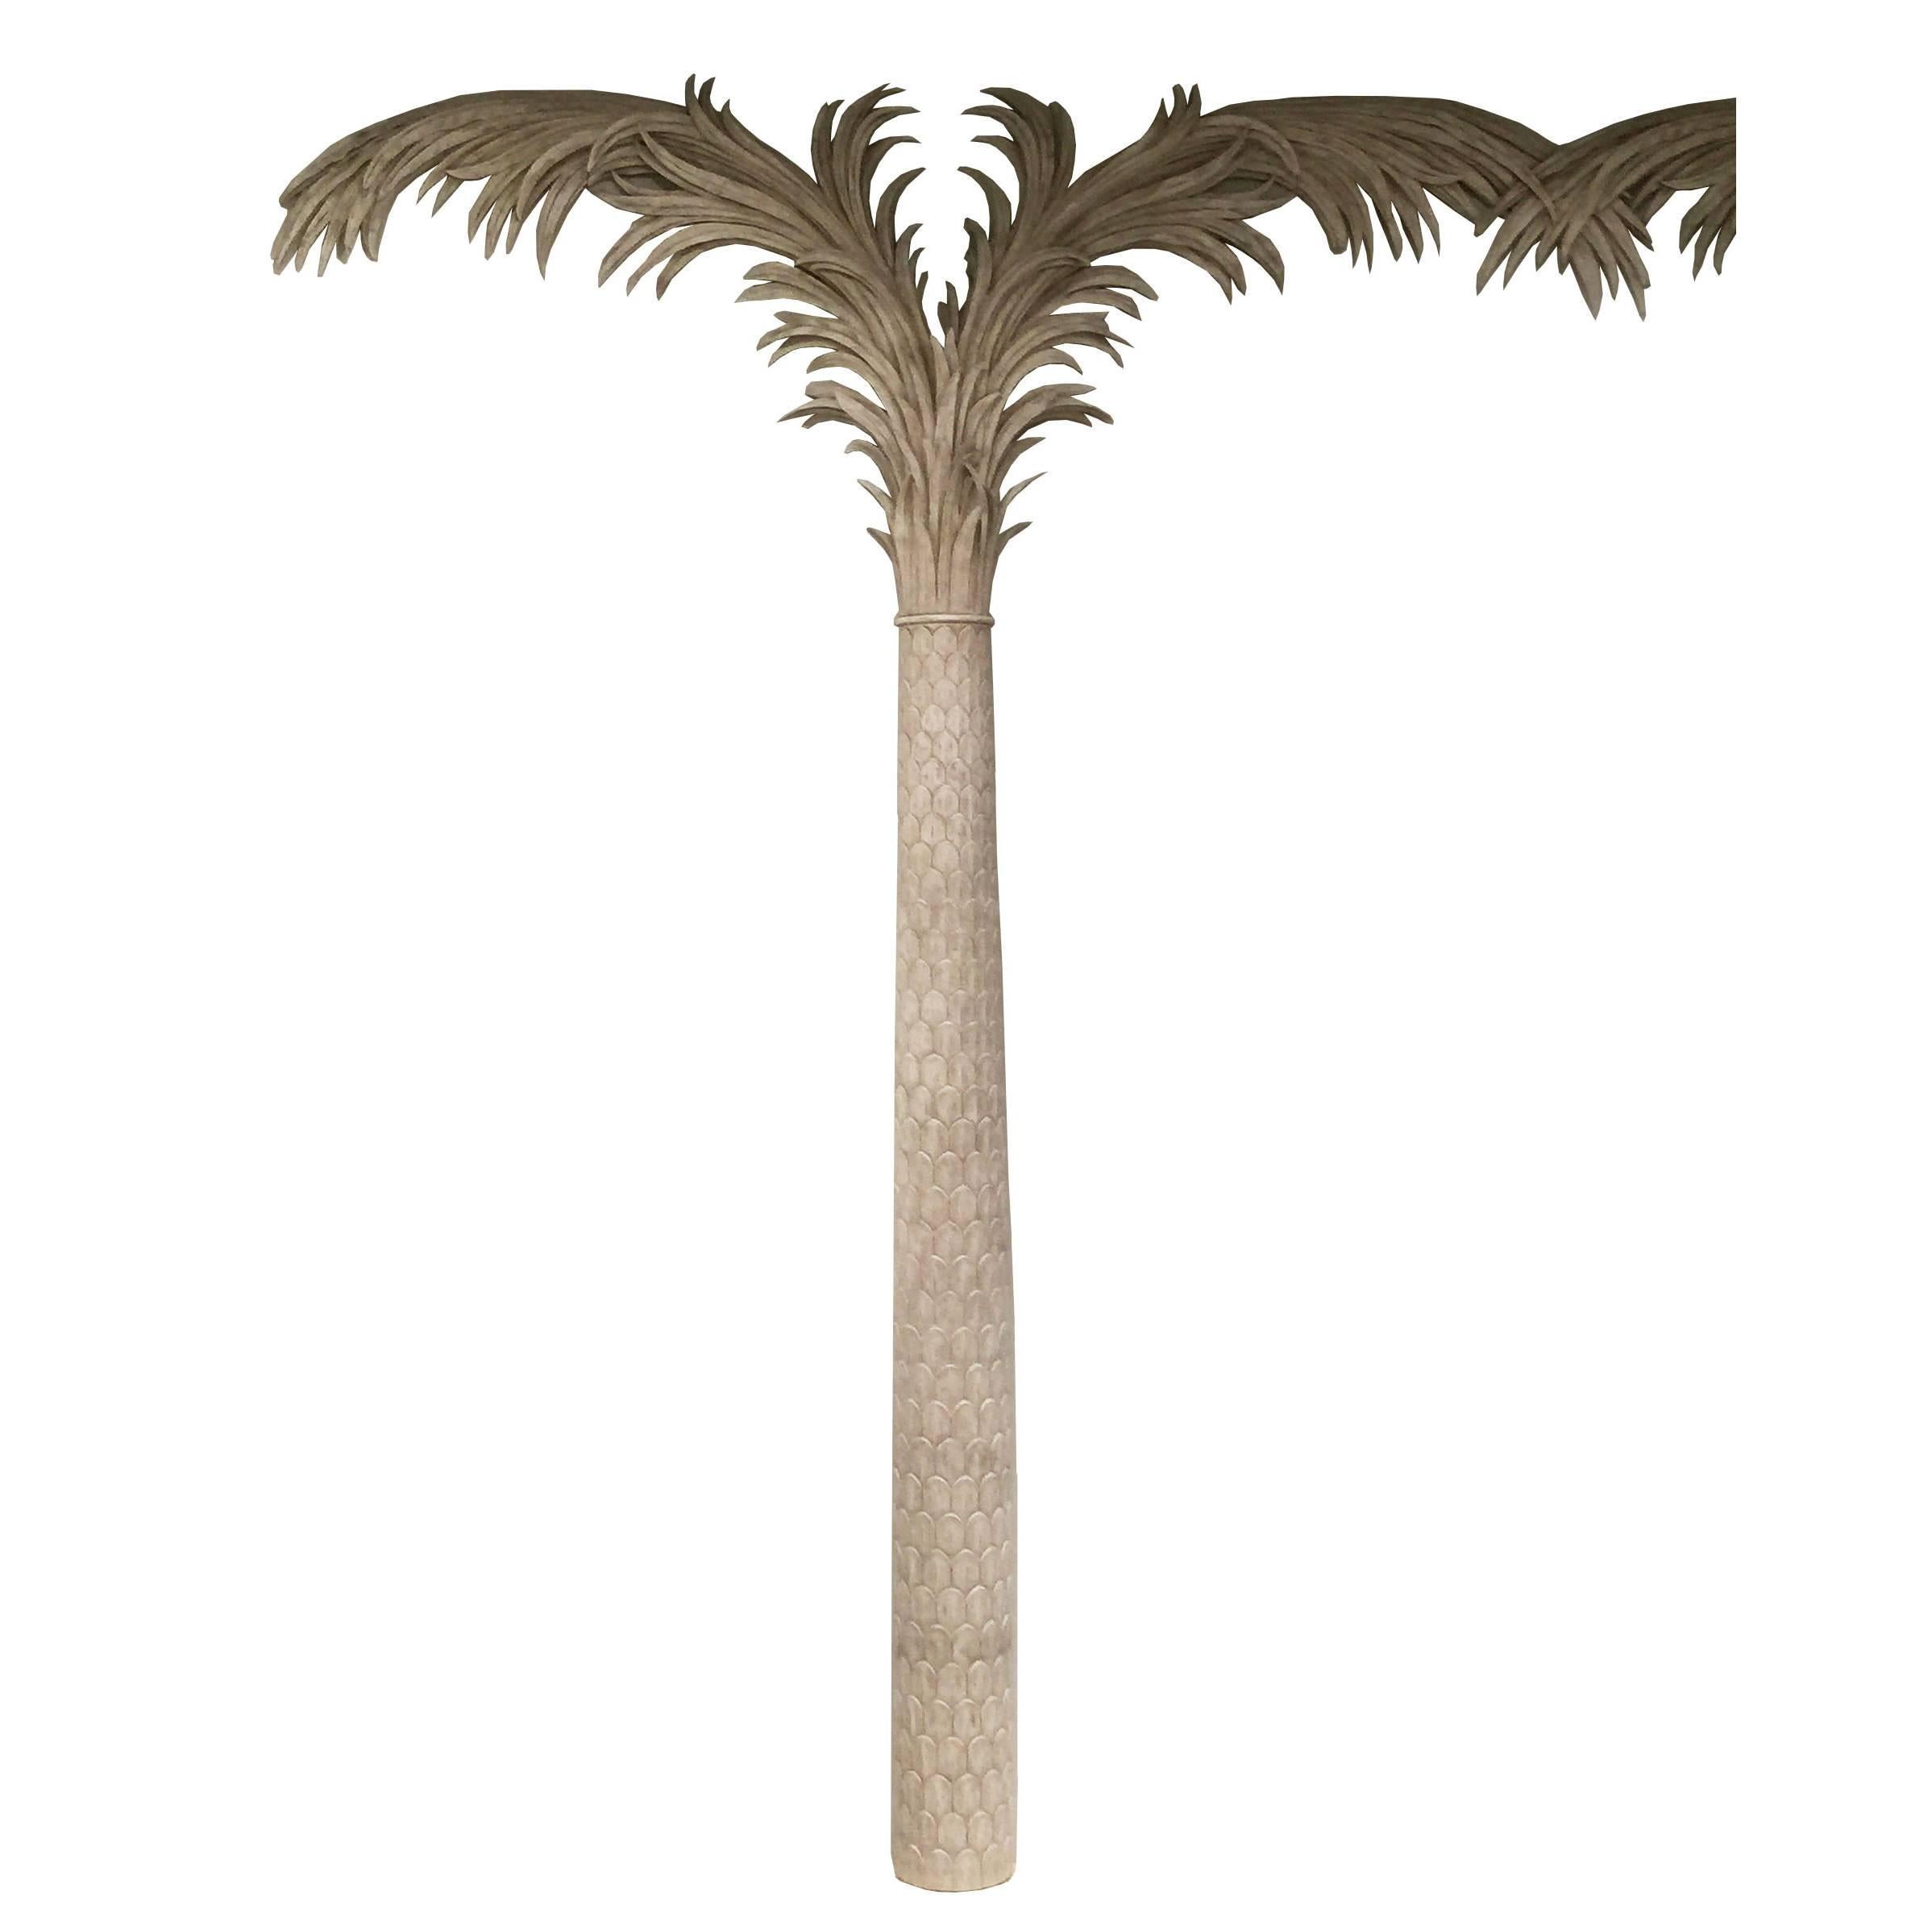 Eleven Palm Tree Pilasters, Featured on Cover of Jansen Book 